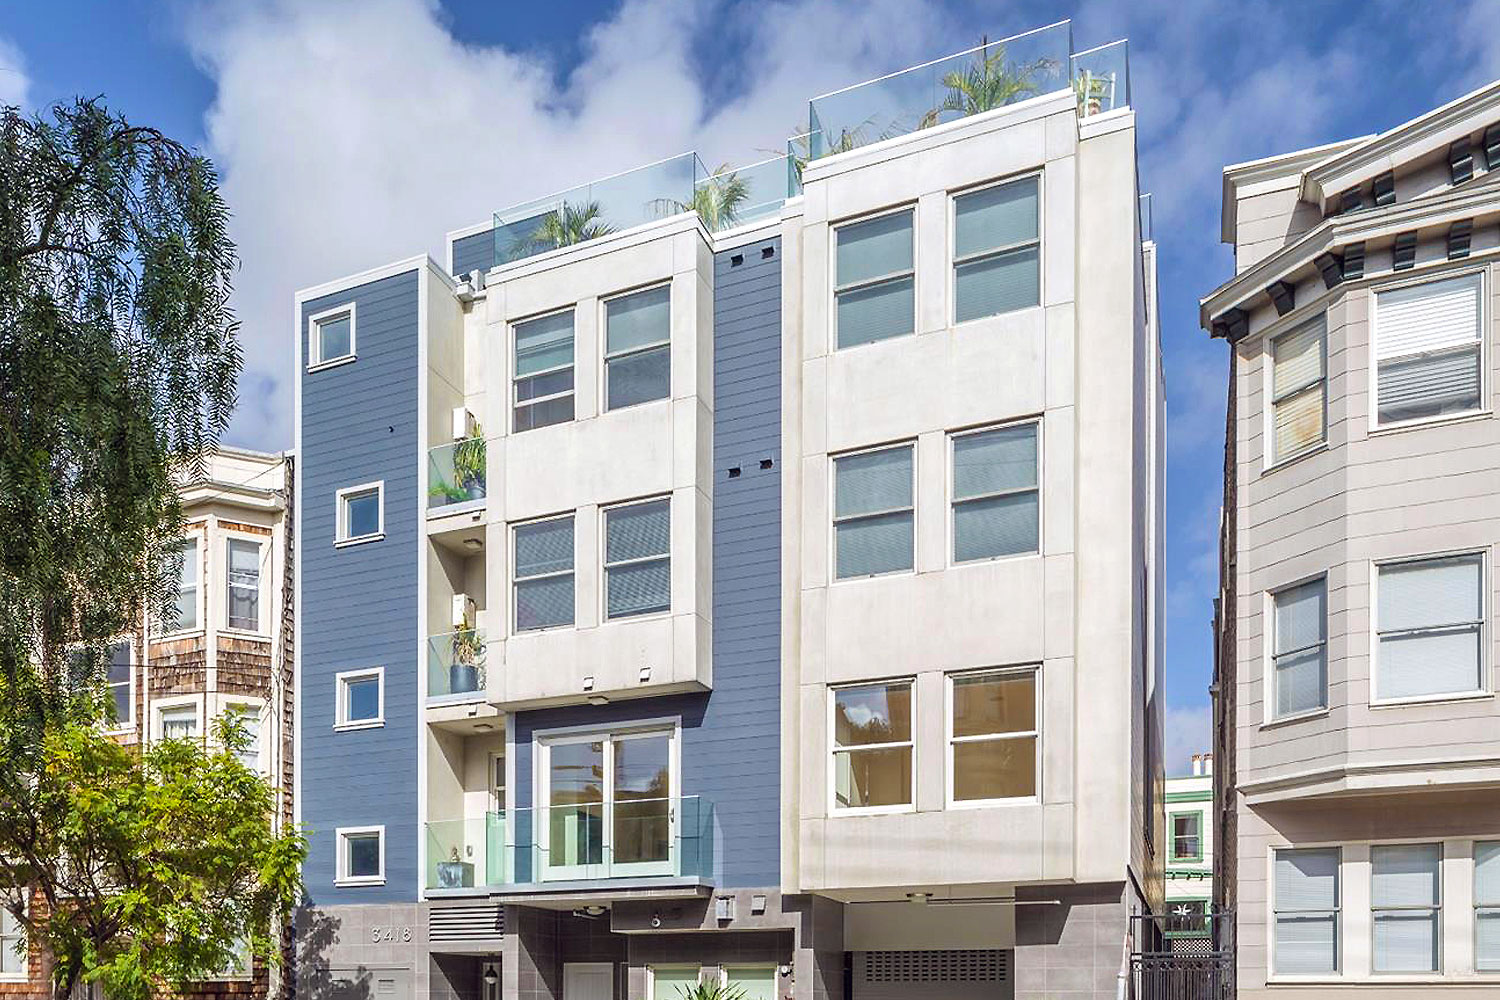 5-story building with 11 units, rooftop deck, and garage parking. New construction features. Painted light blue with white trim.